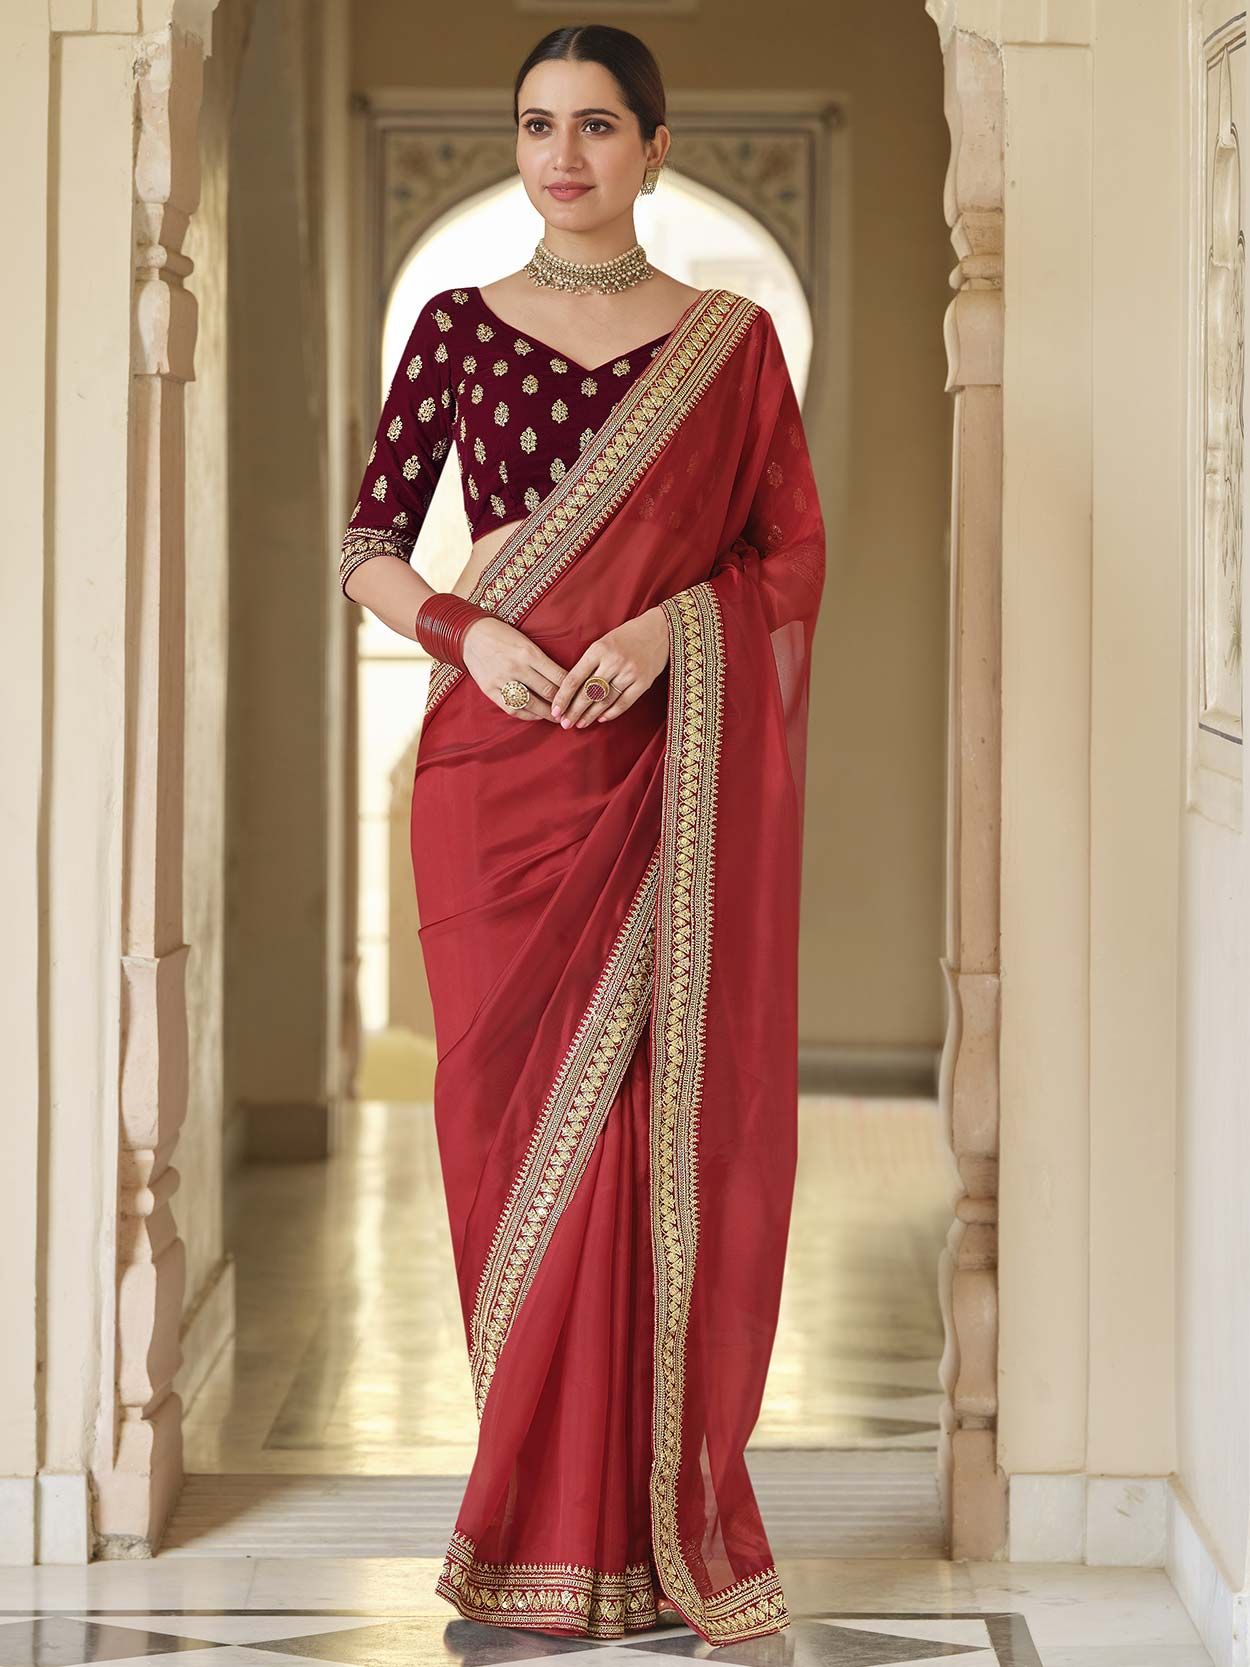 55 Latest Maroon Saree Blouse Designs to Try (2022) - Tips and Beauty | Bridal  sarees south indian, South indian wedding saree, Christian bridal saree